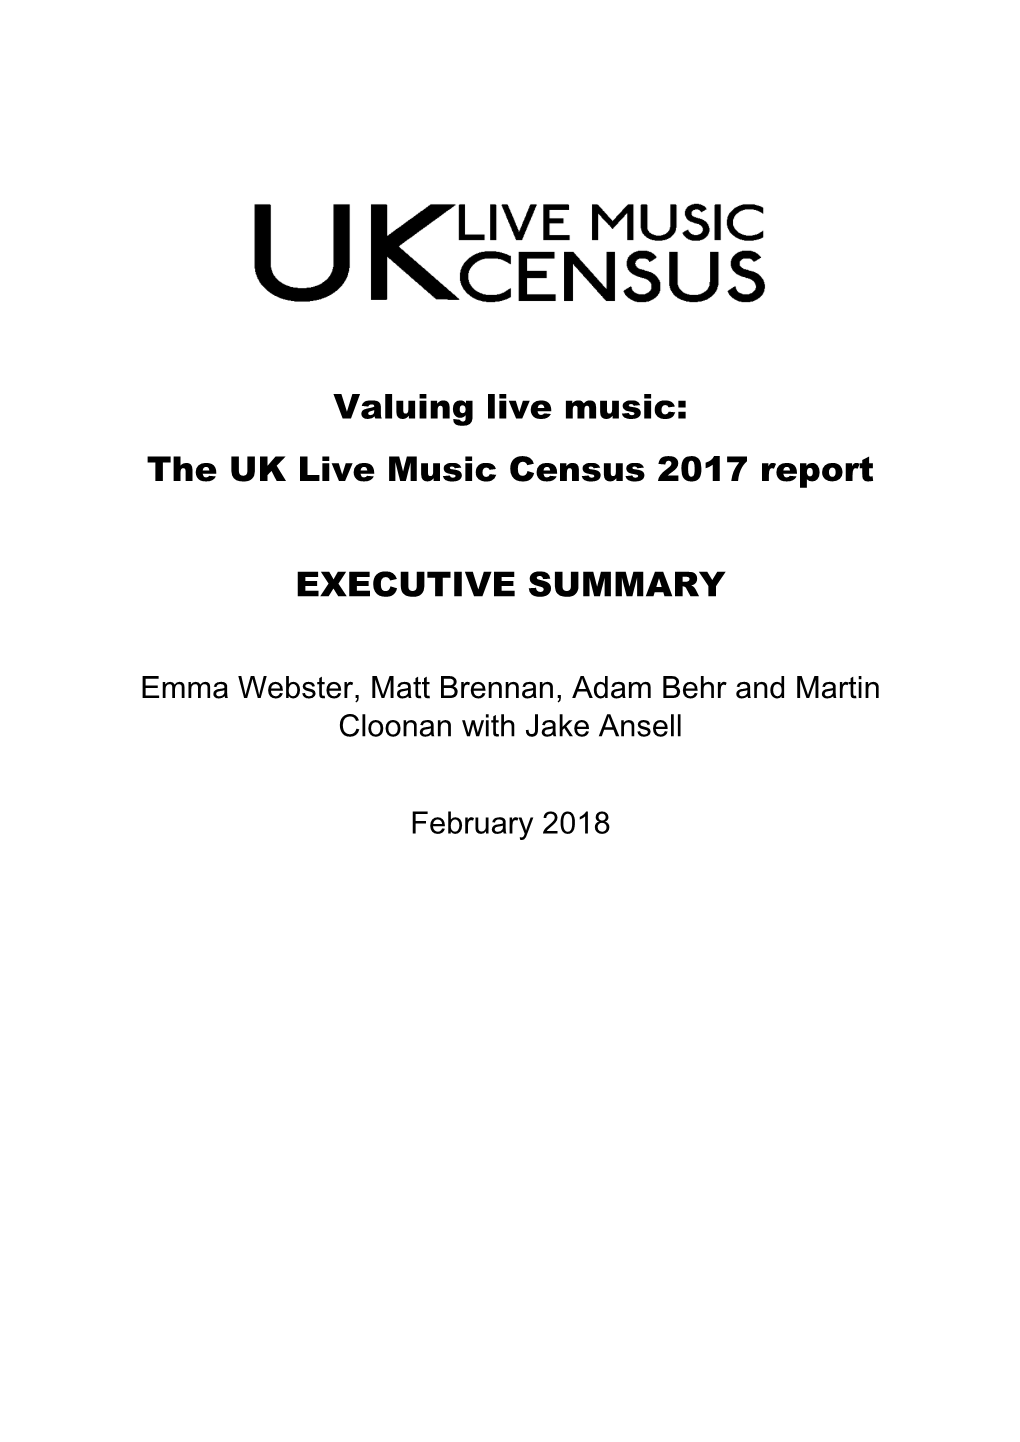 Download UK Live Music Census 2017 Executive Summary LARGE